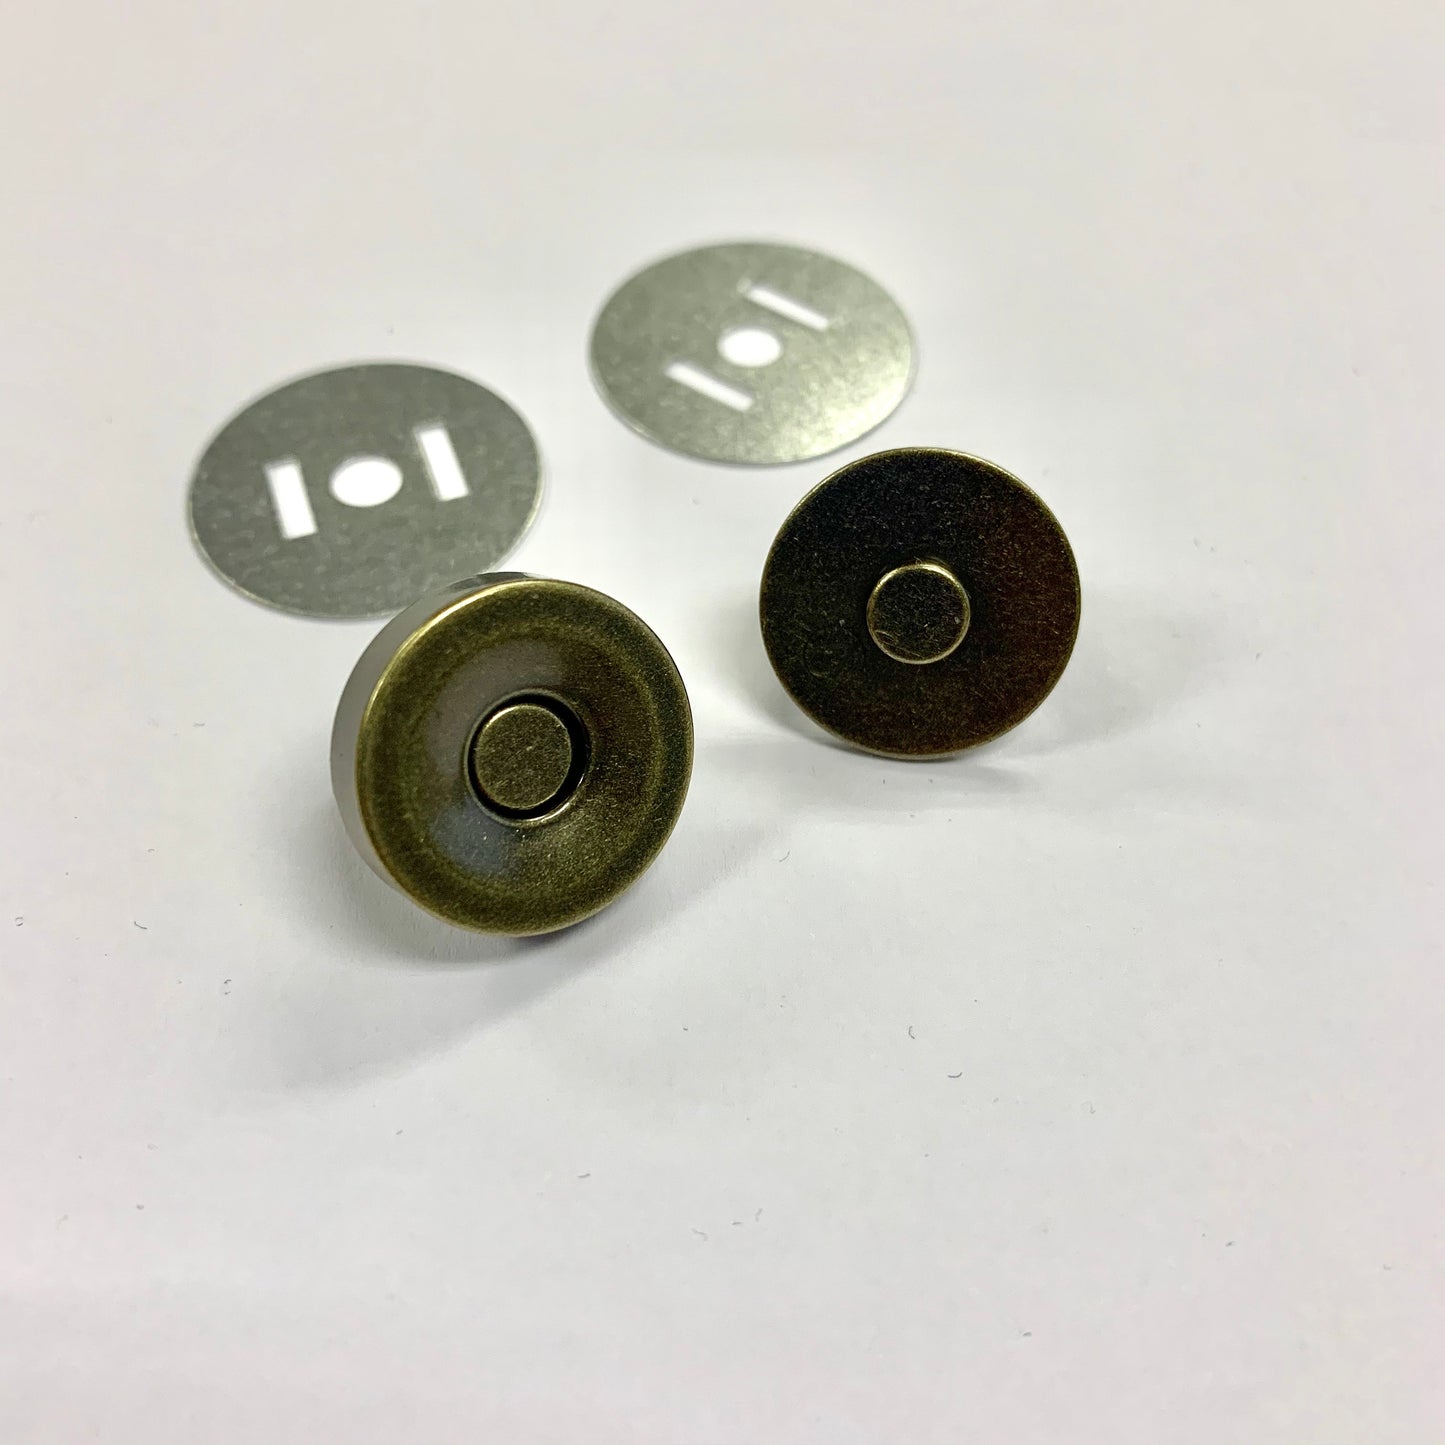 Round Strong Magnet Button 強力磁石扣19mm - 4 colors